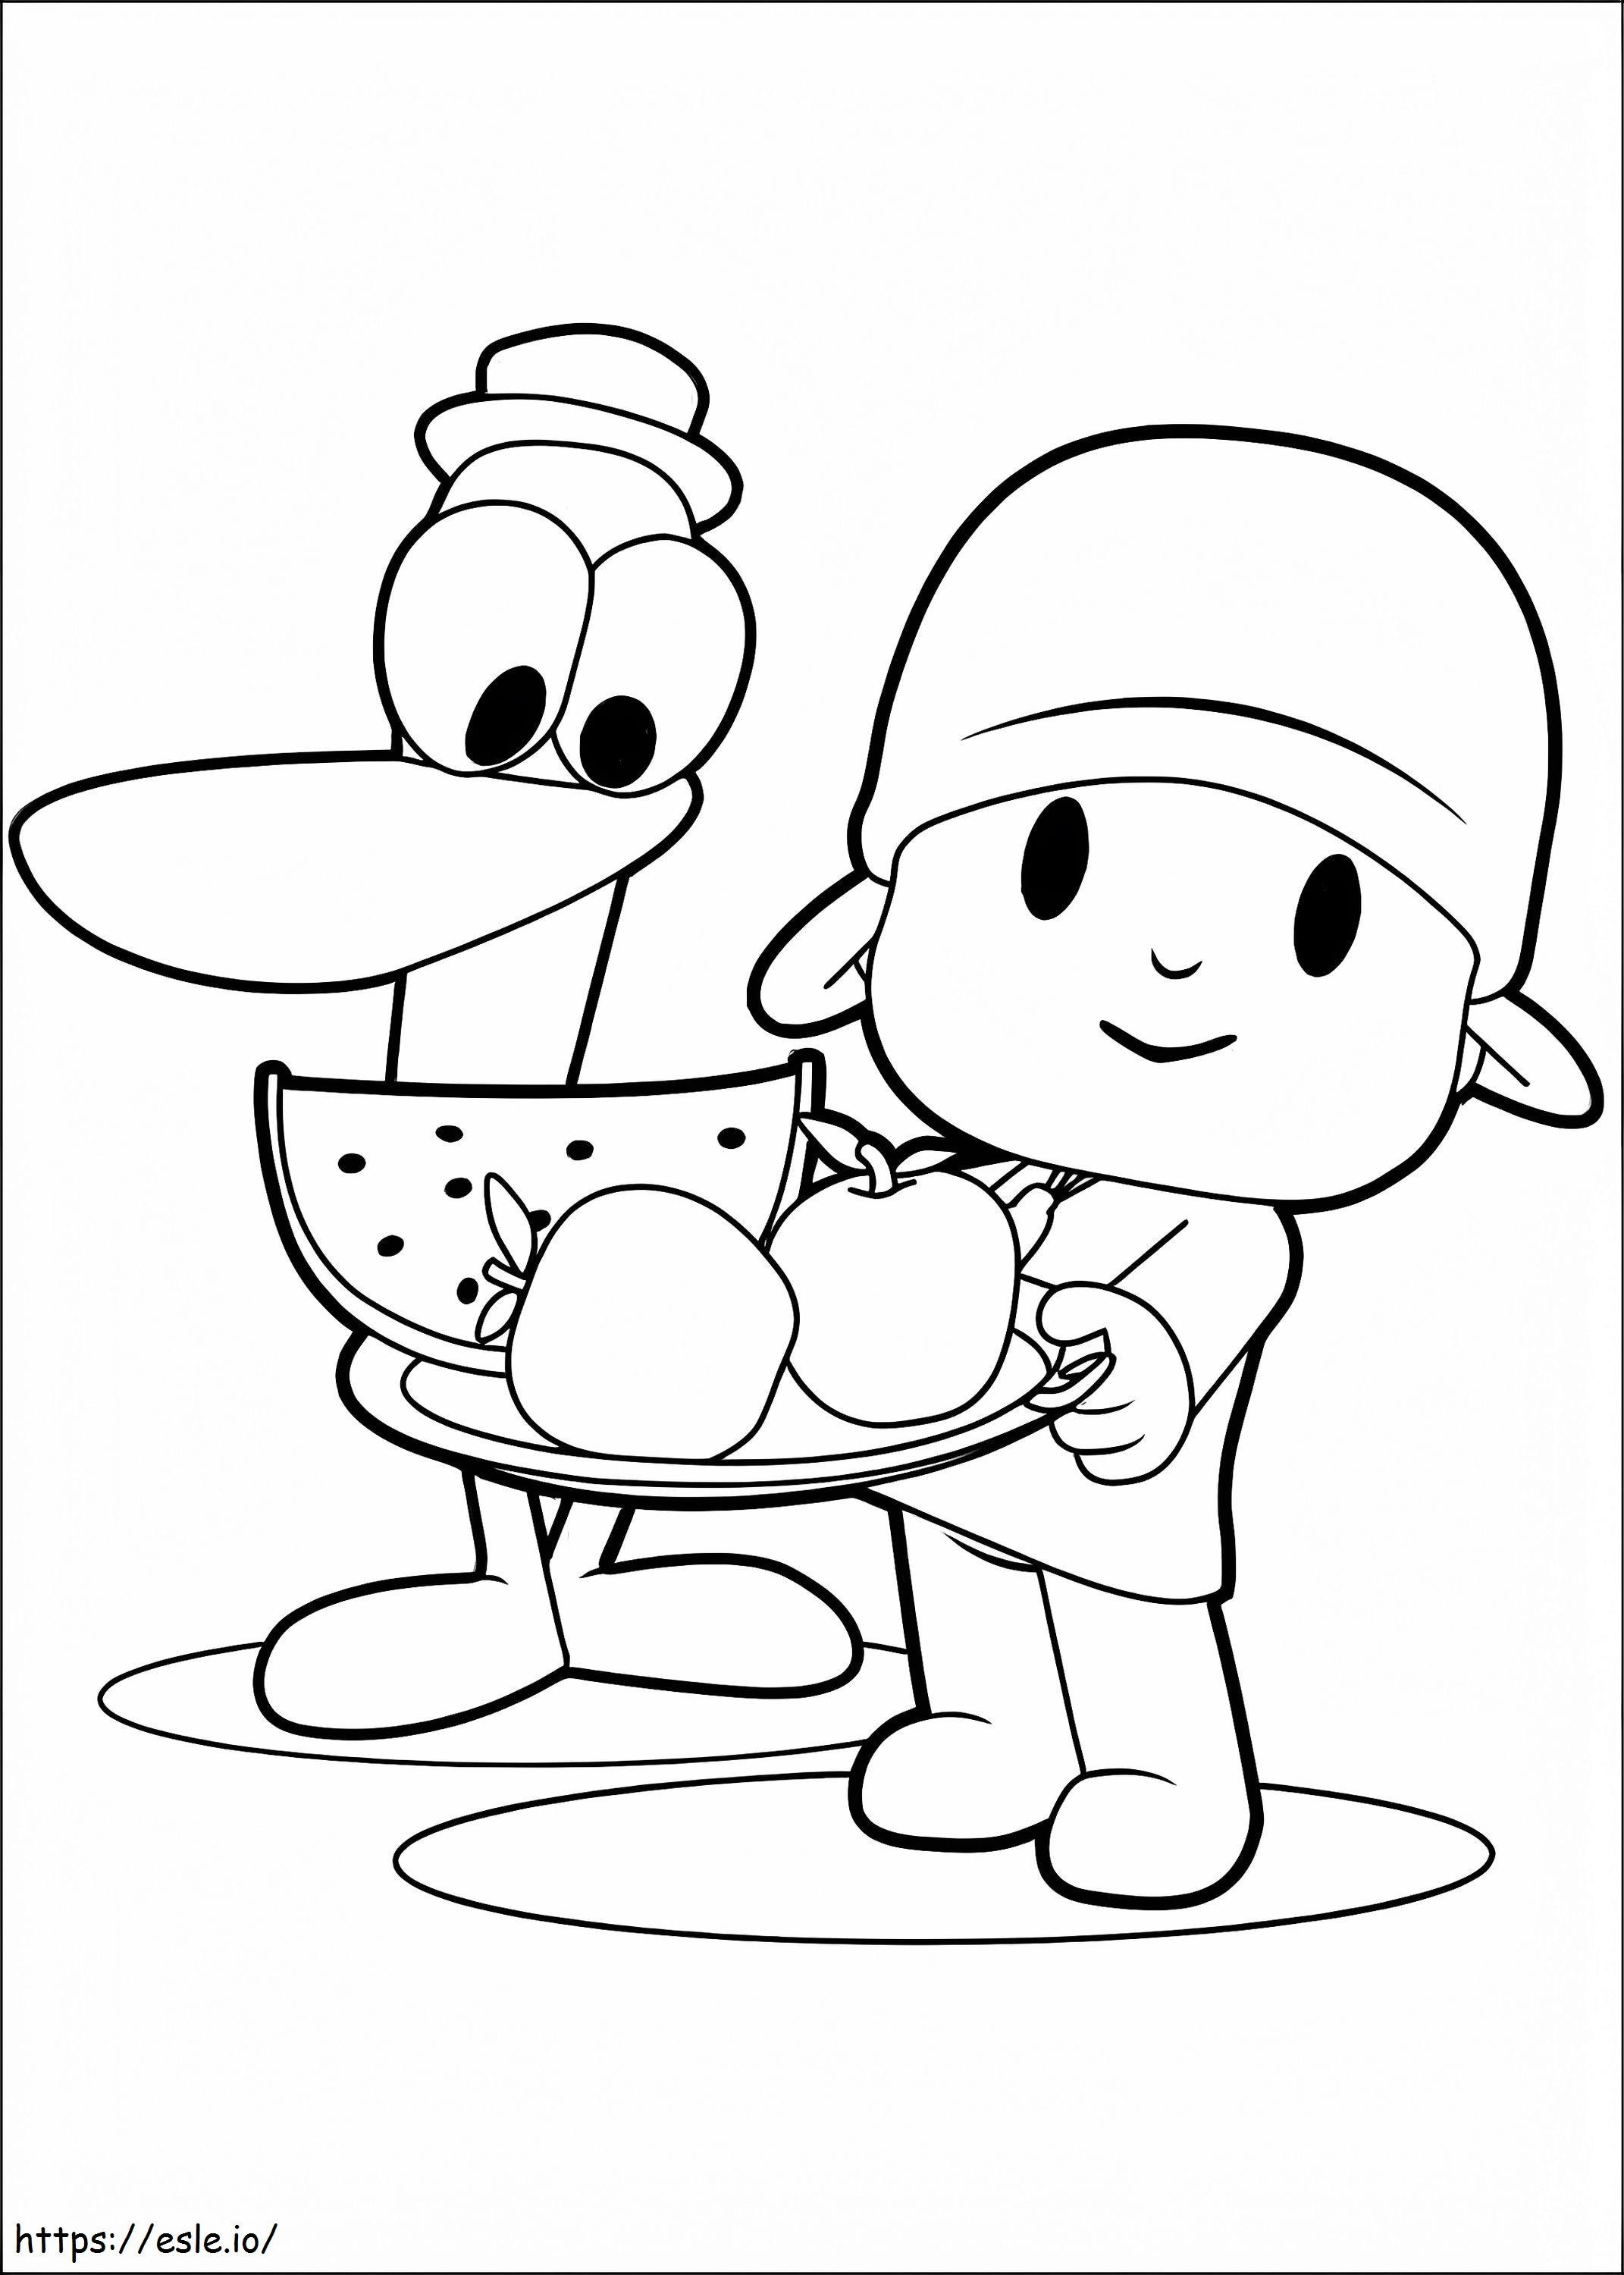 Pocoyo And Pato Holding Bowl Of Fruit coloring page